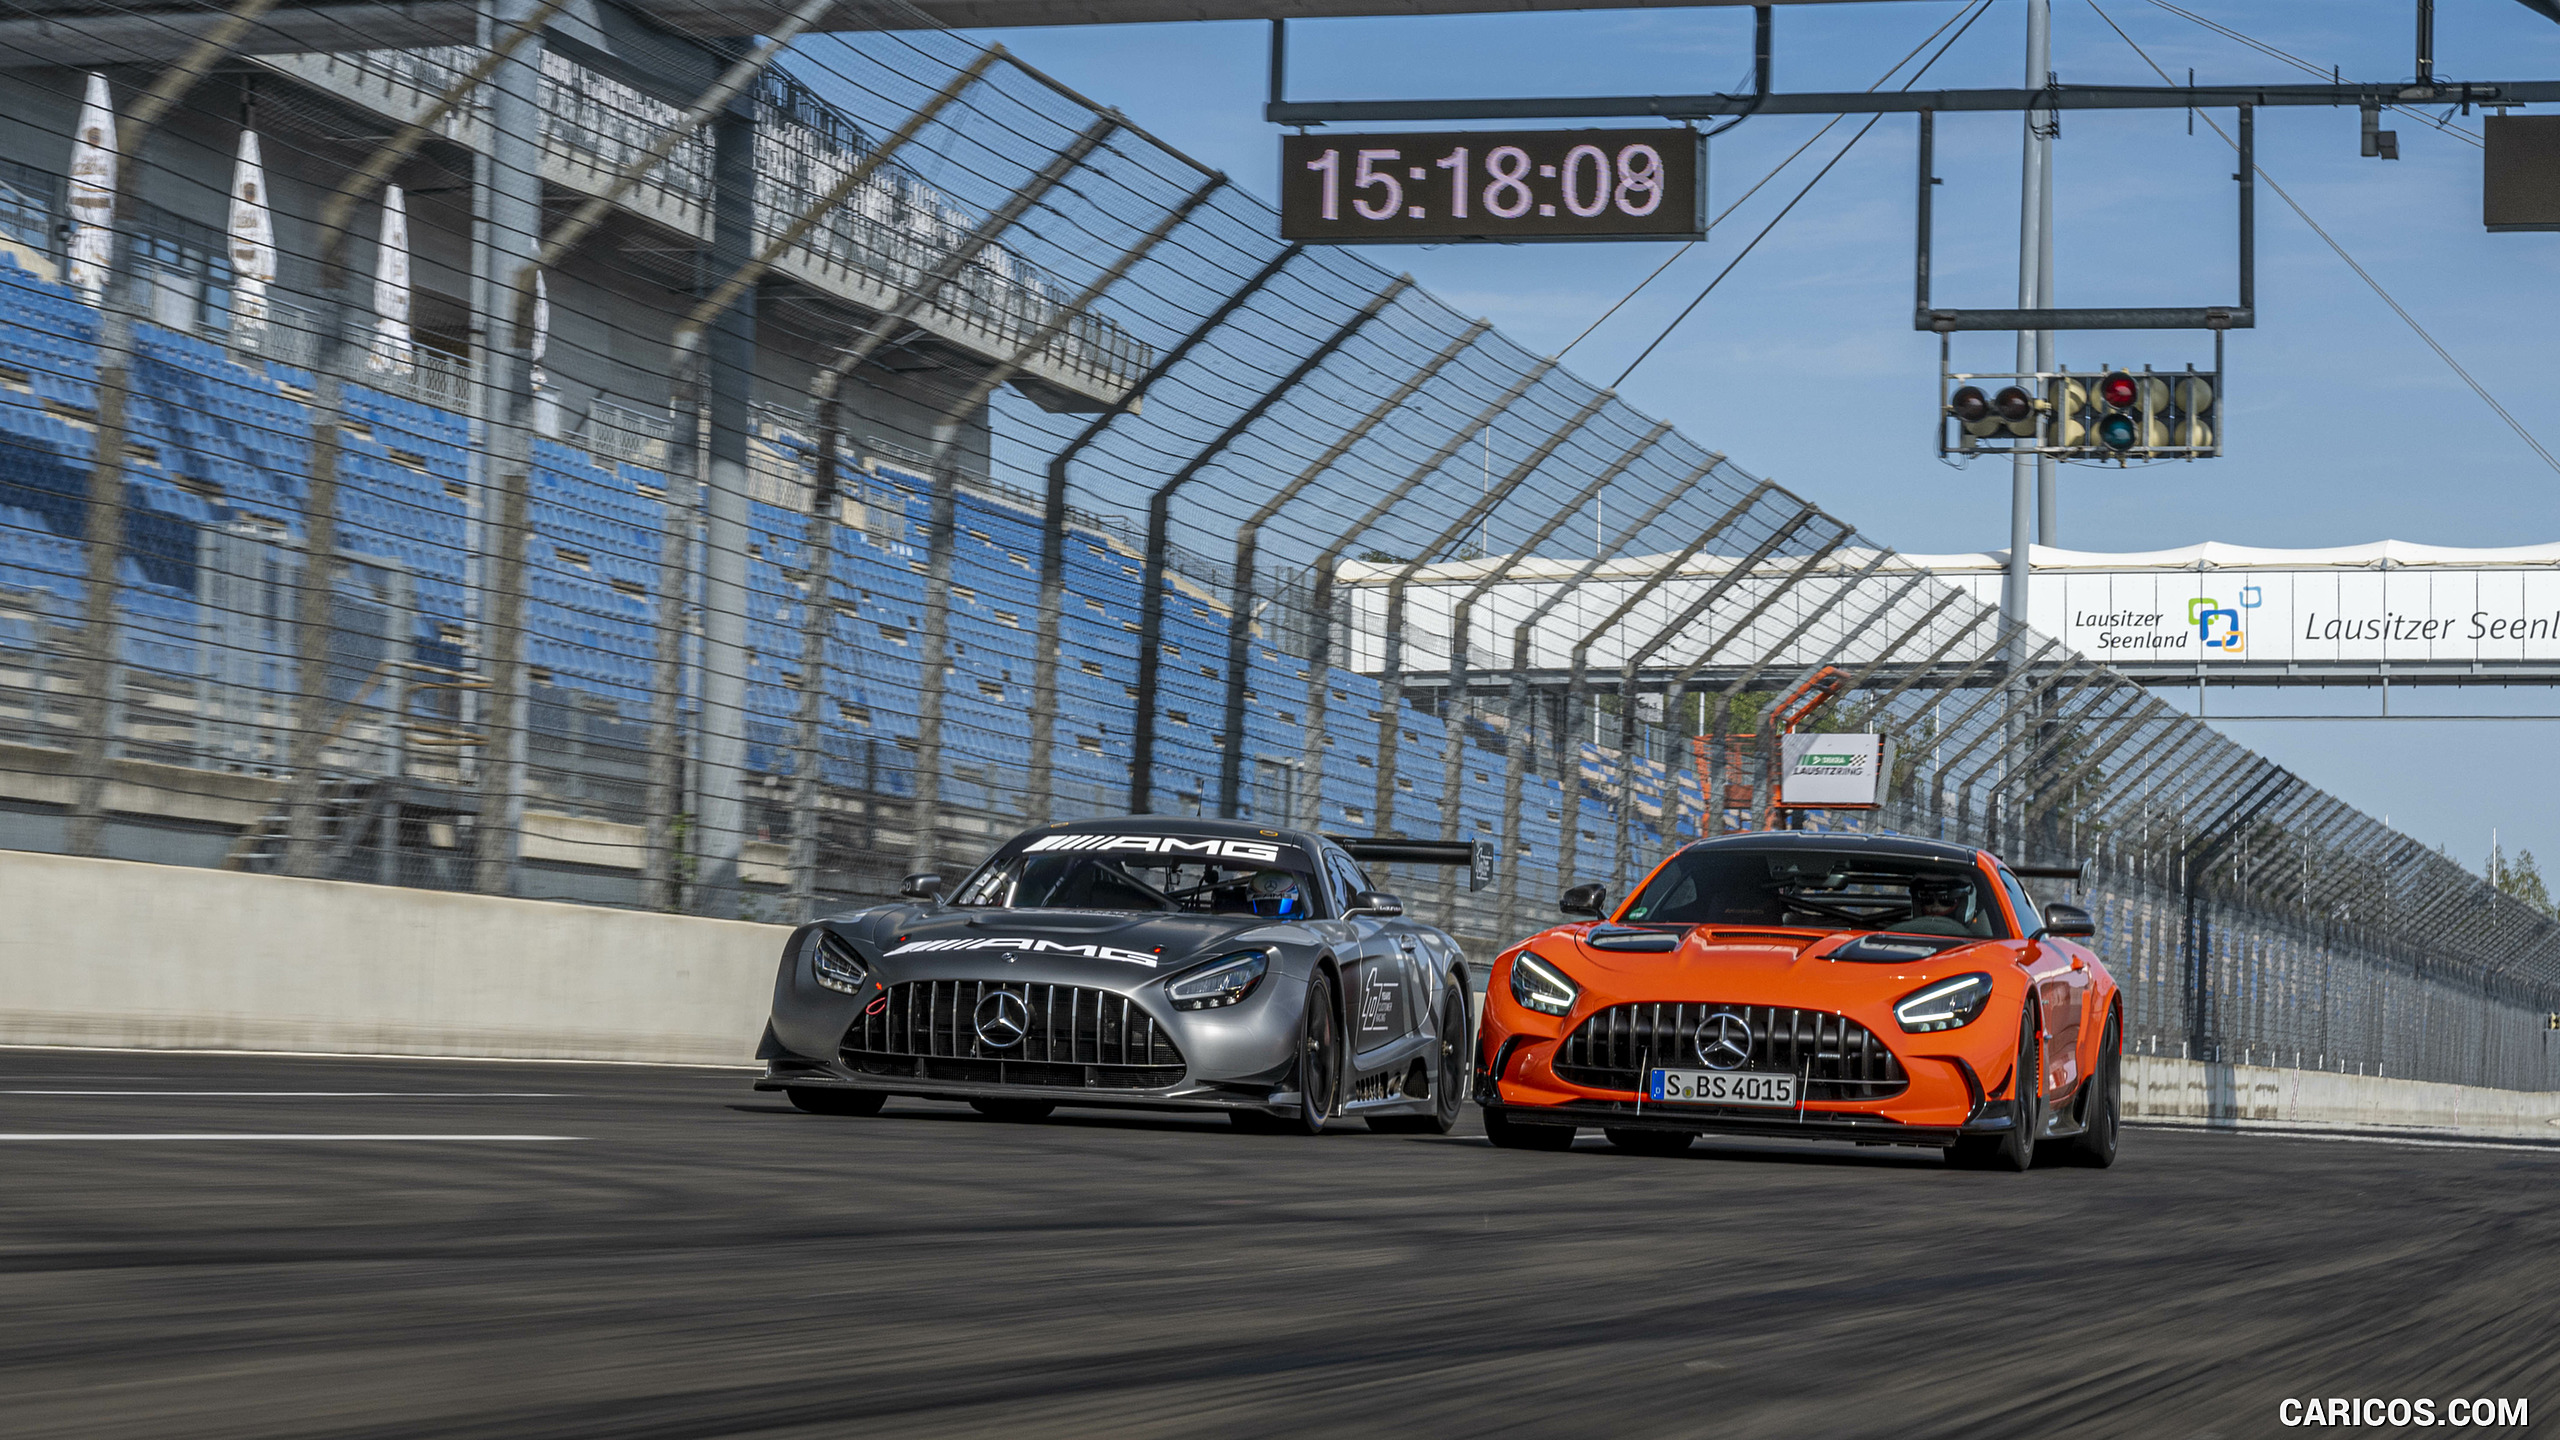 2021 Mercedes-AMG GT Black Series (Color: Magma Beam) and AMG GT3 Racing Car, #146 of 215